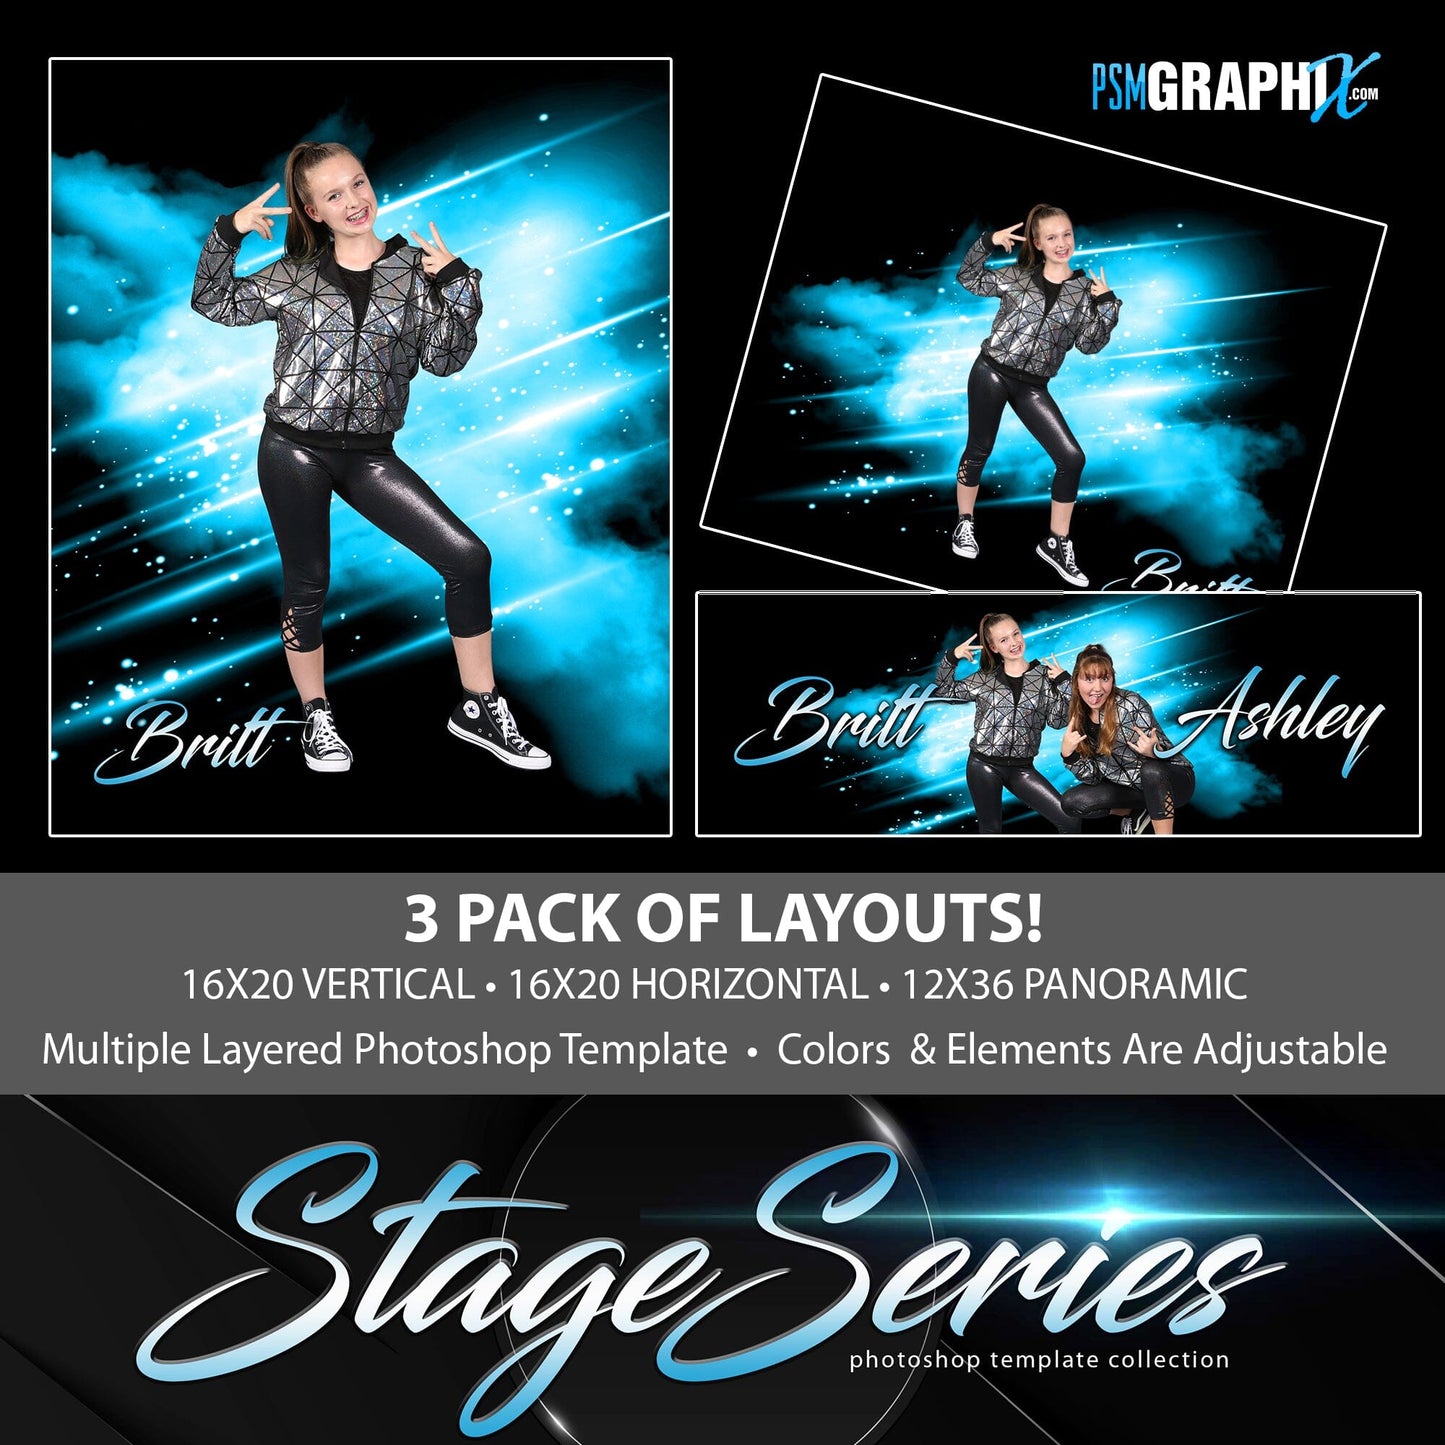 Fire Lights - Stage Series II - Photoshop Template 3 Pack-Photoshop Template - PSMGraphix